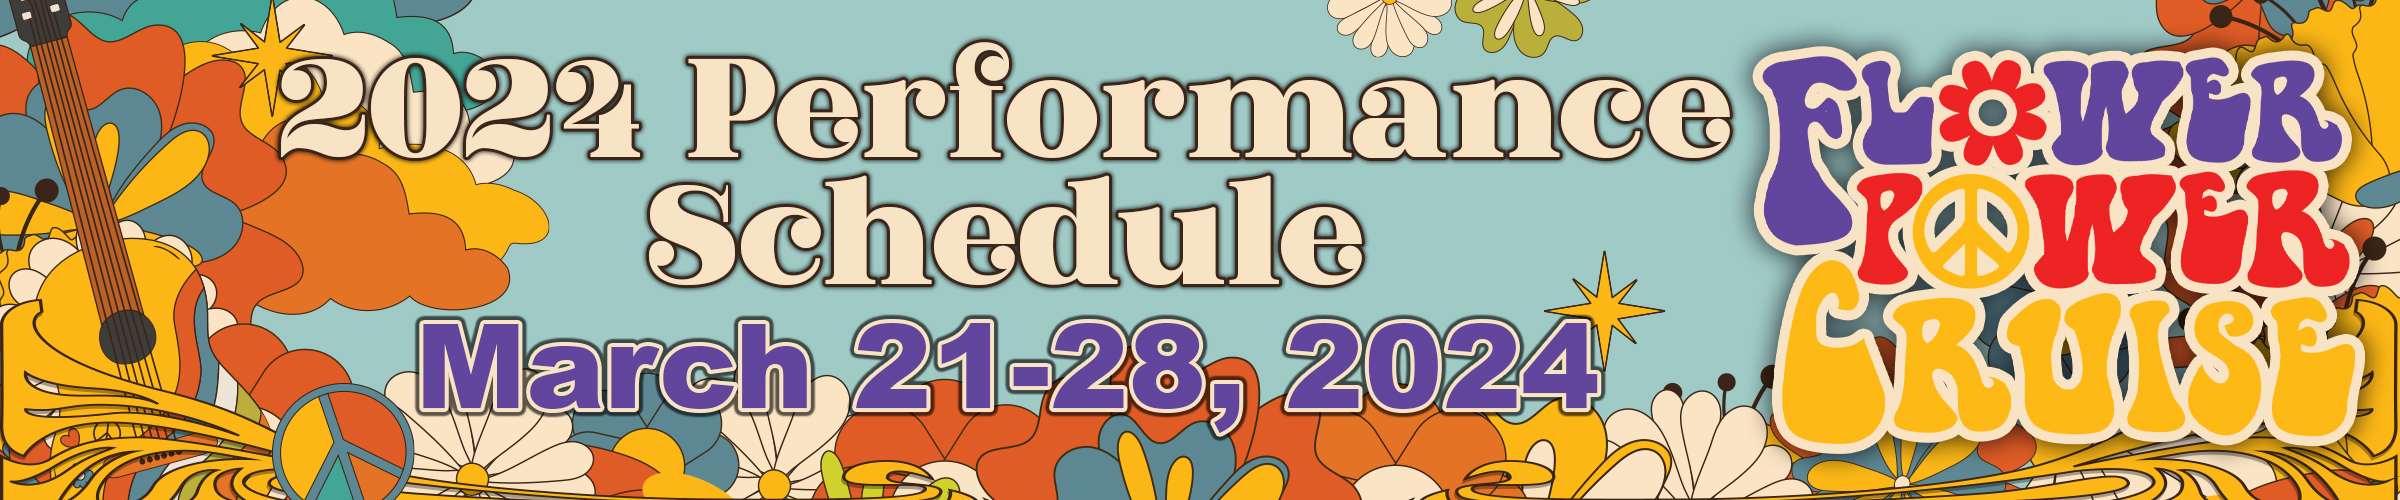 View the Schedule of Events and Directory Flower Power Cruise